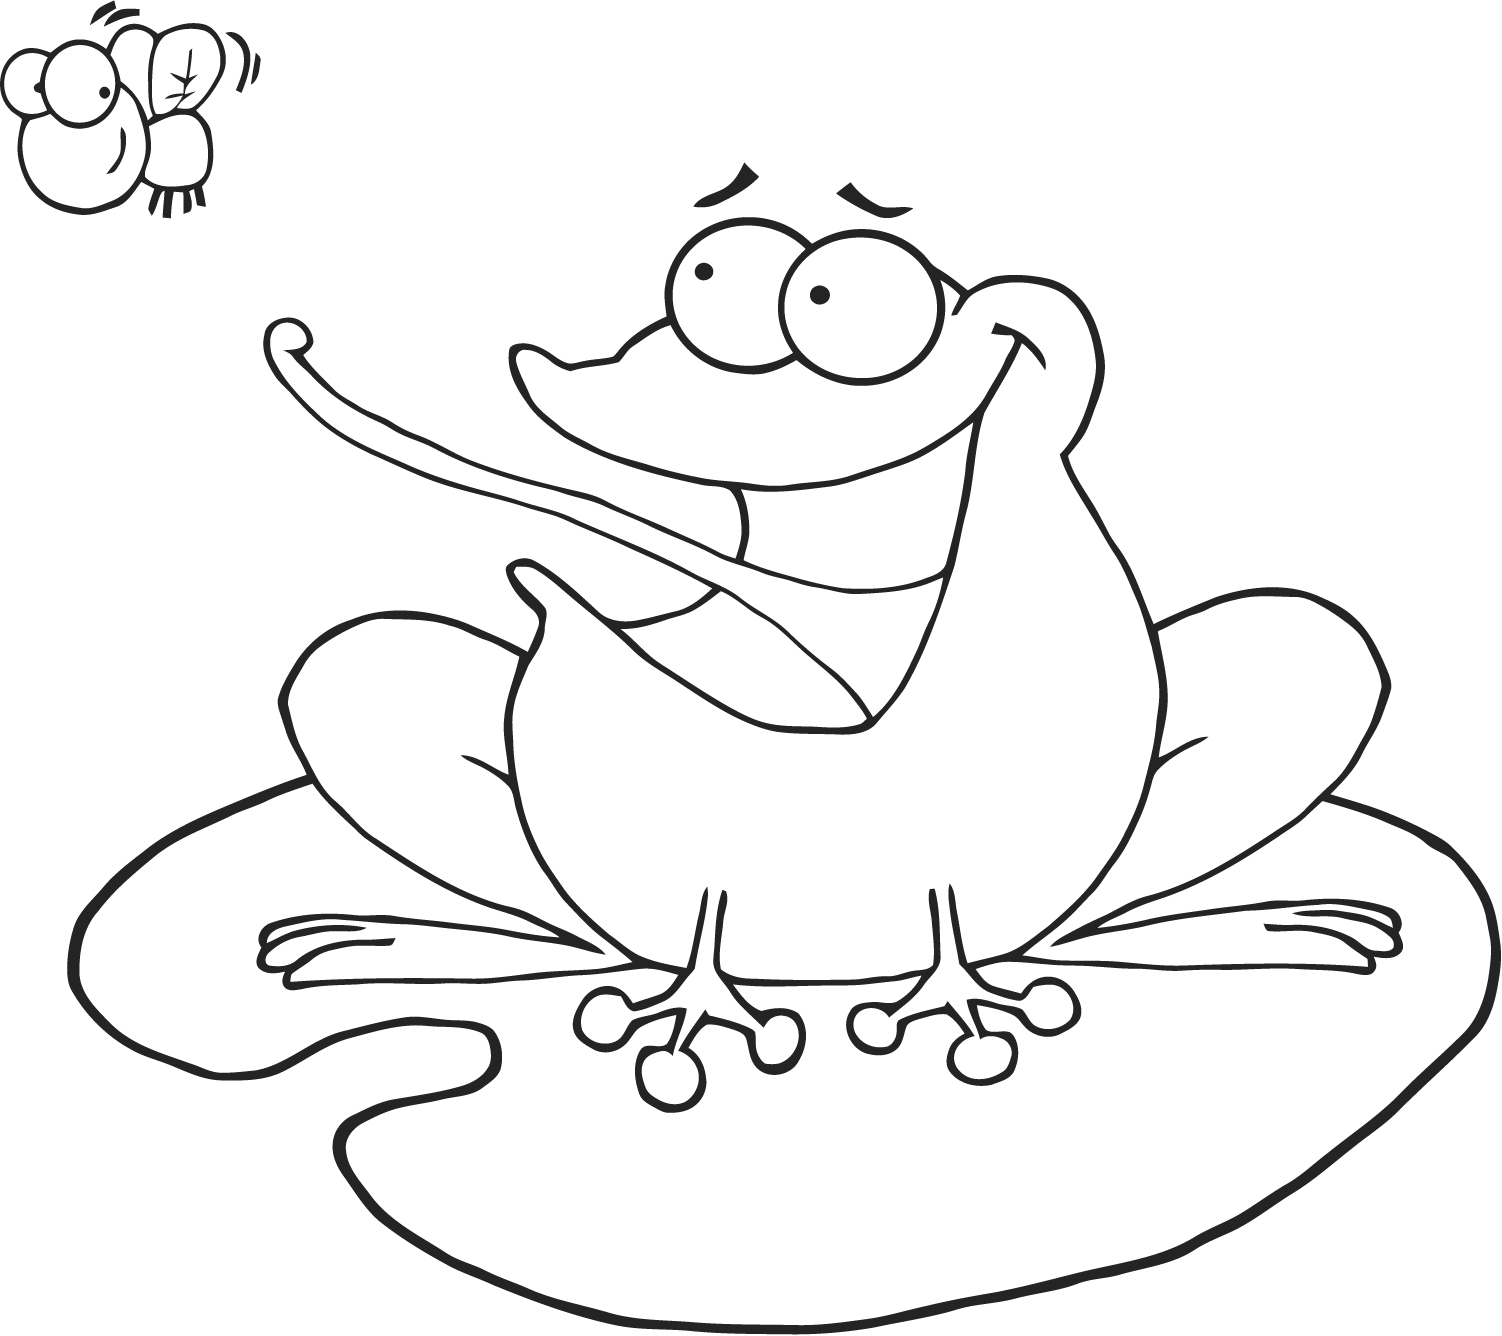 frog catching a fly coloring pages printable pictures : - Coloring 